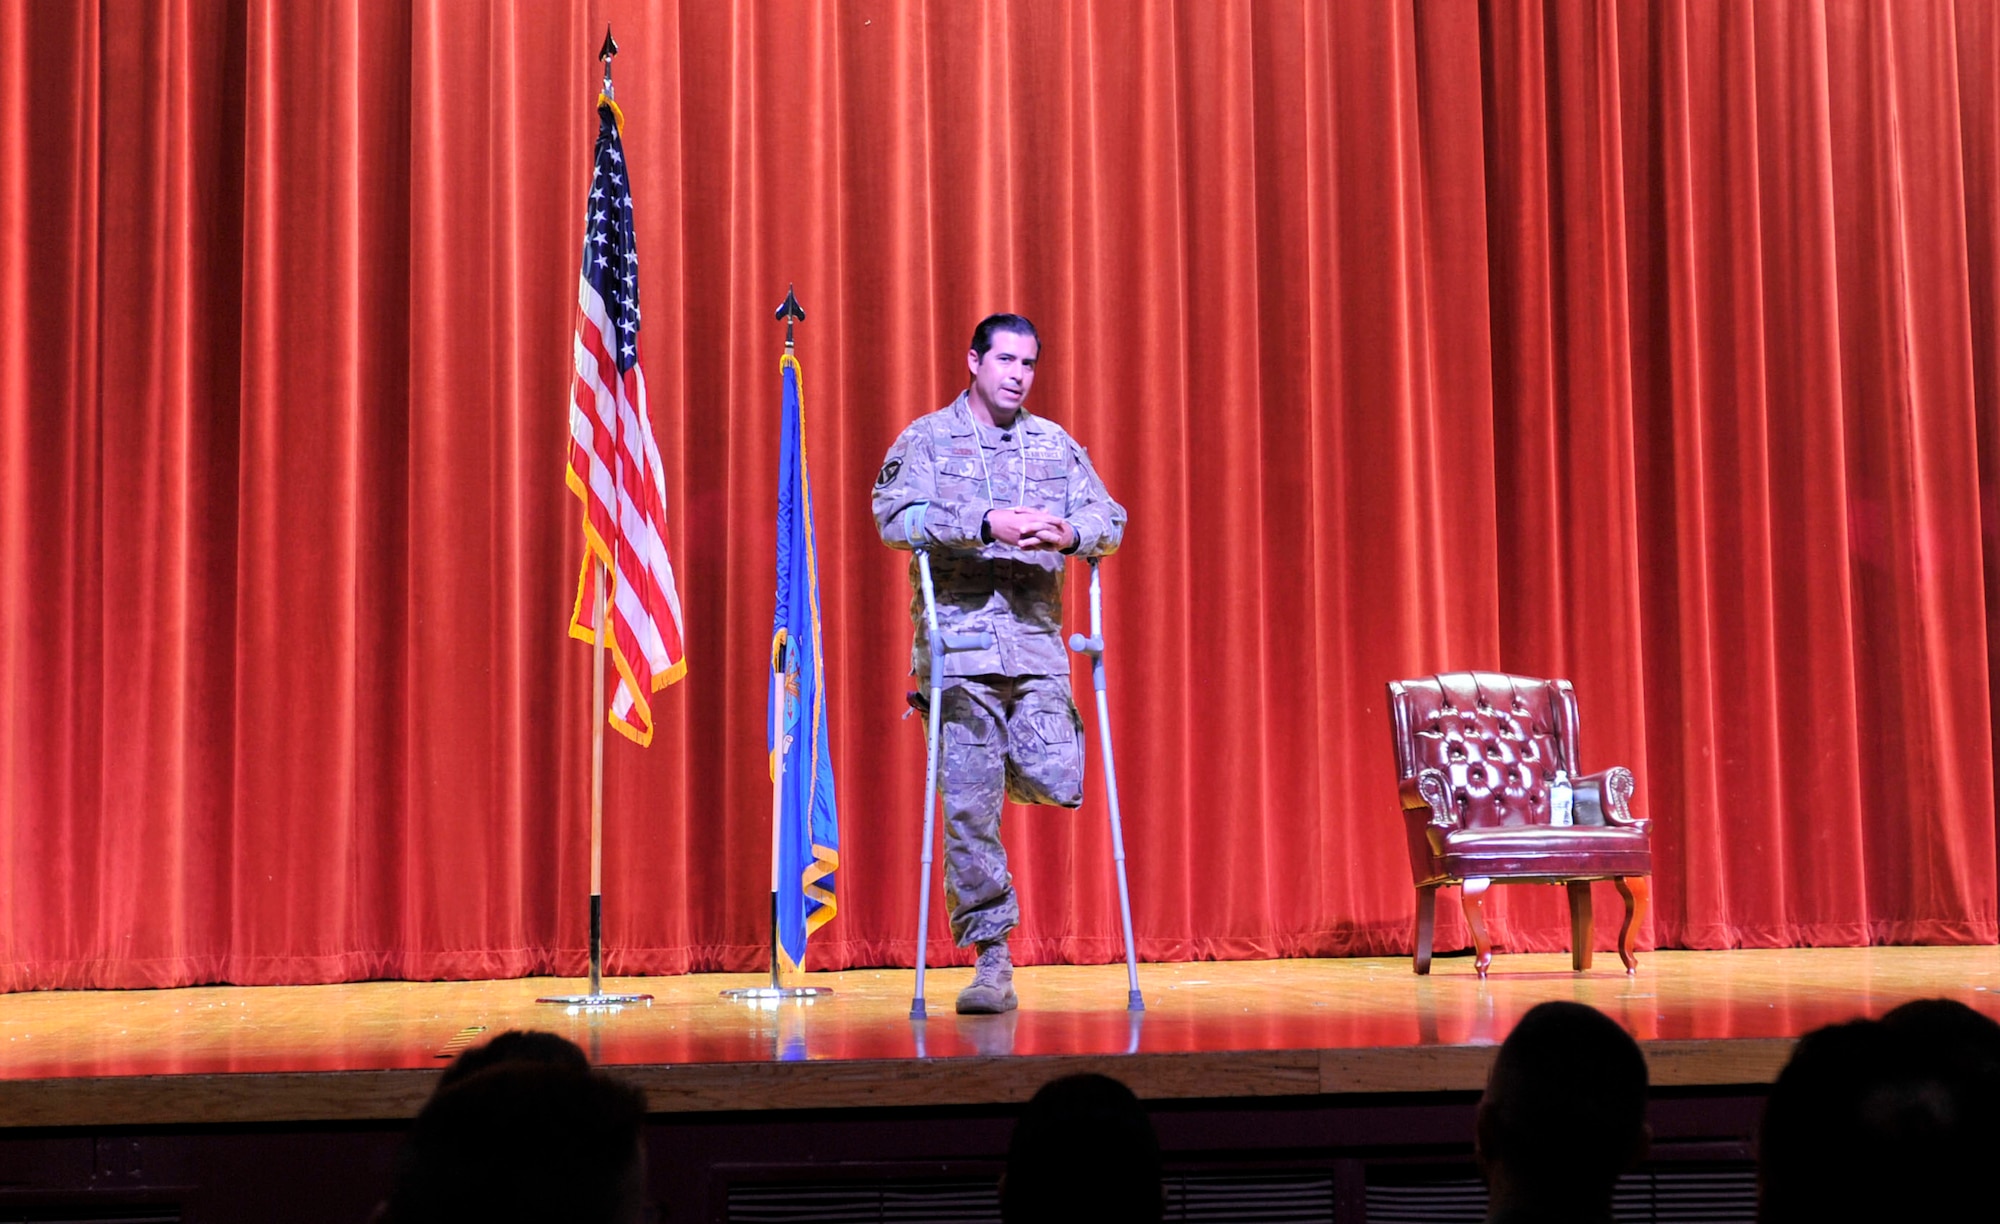 Tech. Sgt. August O’Niell shares his story of physical and mental resiliency with attendees at Joint Base San Antonio-Lackland, Texas on May 6, 2023. Ordinarily with a prosthetic, O’Niell explains a recent surgery requires him to forego the mobility aid for conventional crutches and that his limitations are minimal with respect to his motivations. (U.S. Air Force photo by Alex Dieguez)